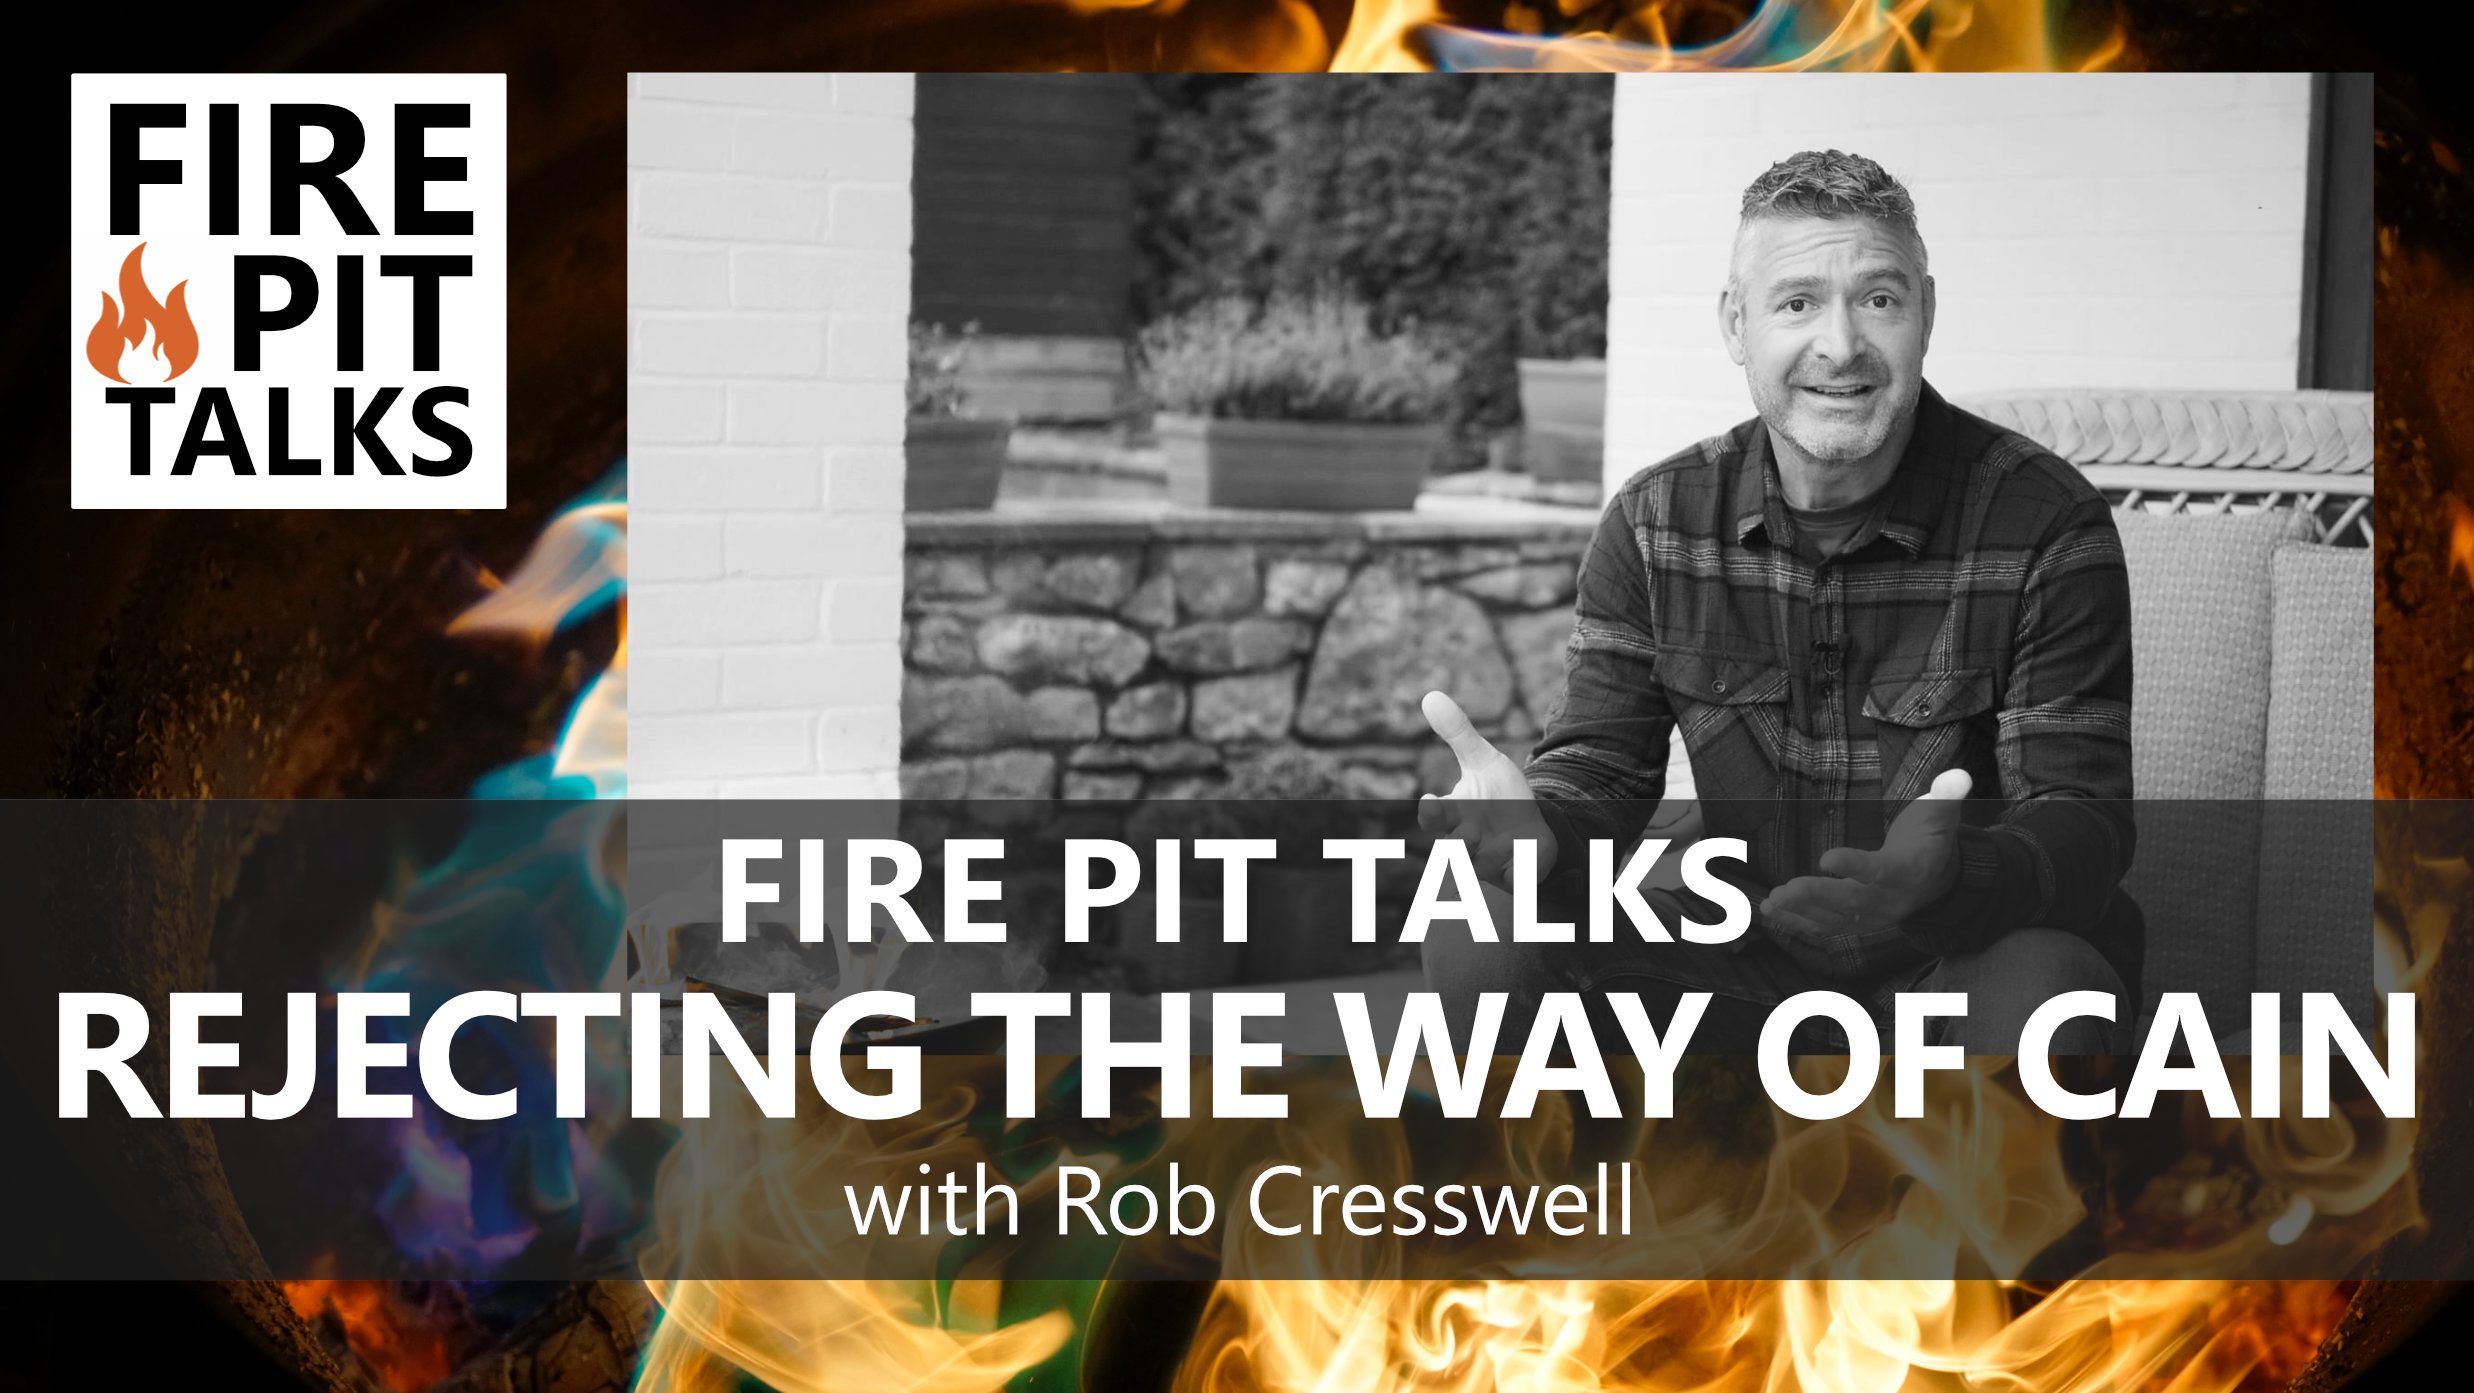 FIRE PIT TALKS - REJECTING THE WAY OF CAIN